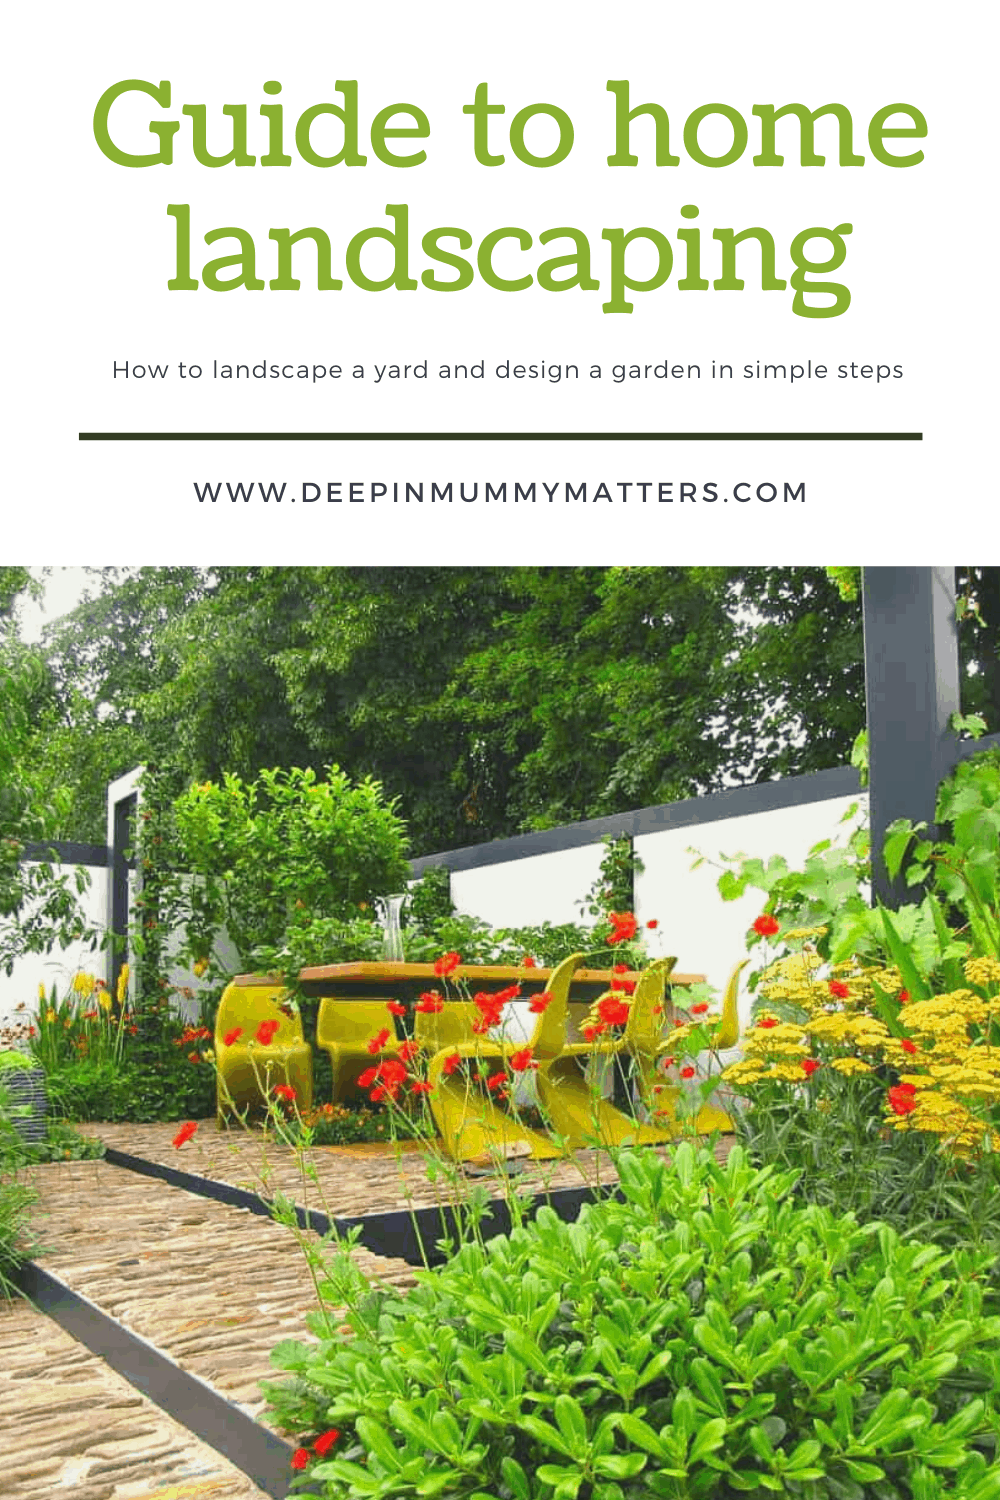 This smart guide to home landscaping explains how to landscape a yard and design a garden in simple steps. You'll have your own little space outdoors.